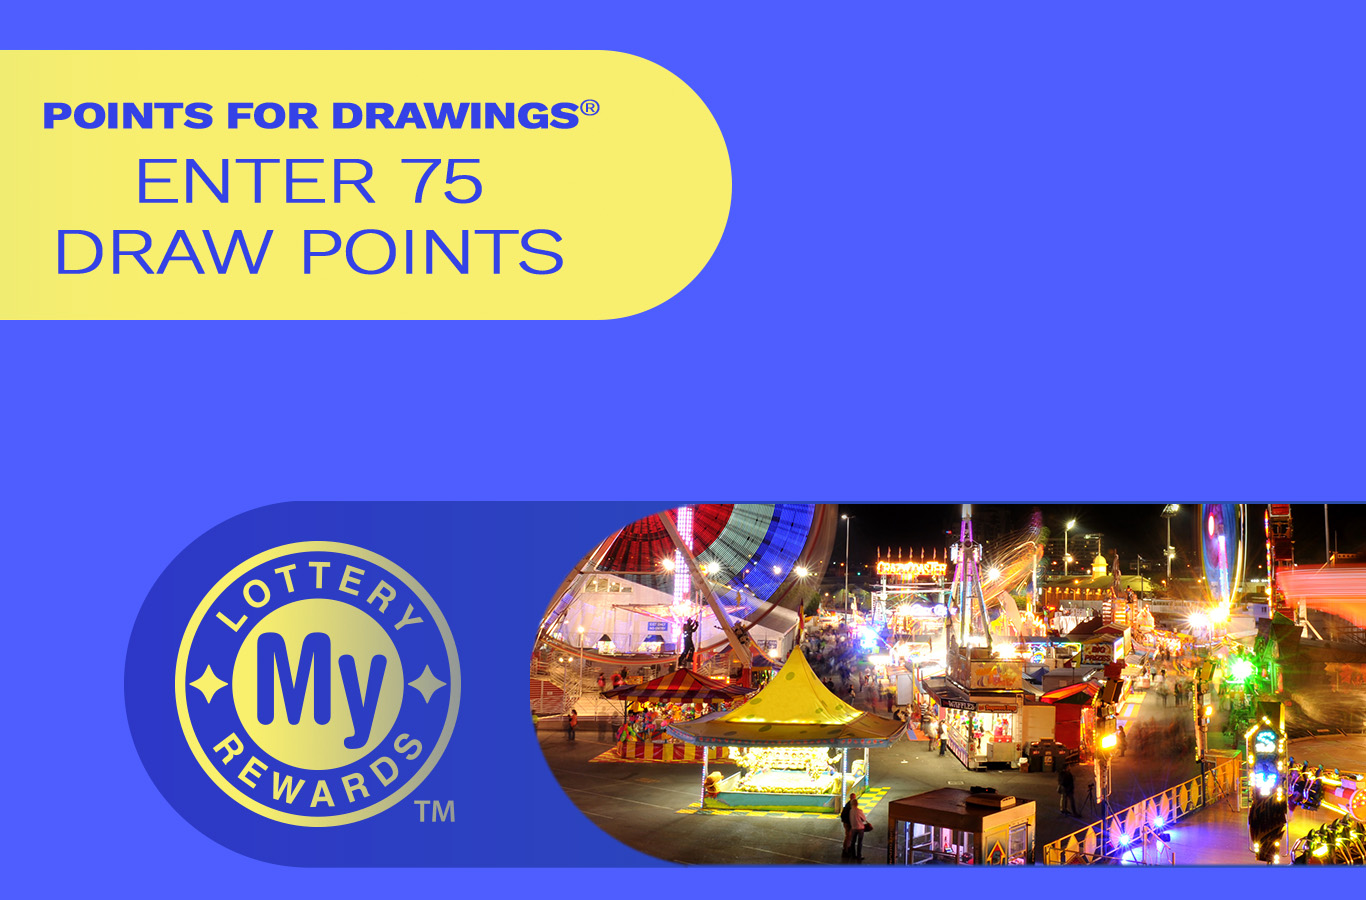 Here's your chance to win $1,000 and tickets to the Maryland State Fair! Enter by Monday, August 1st.